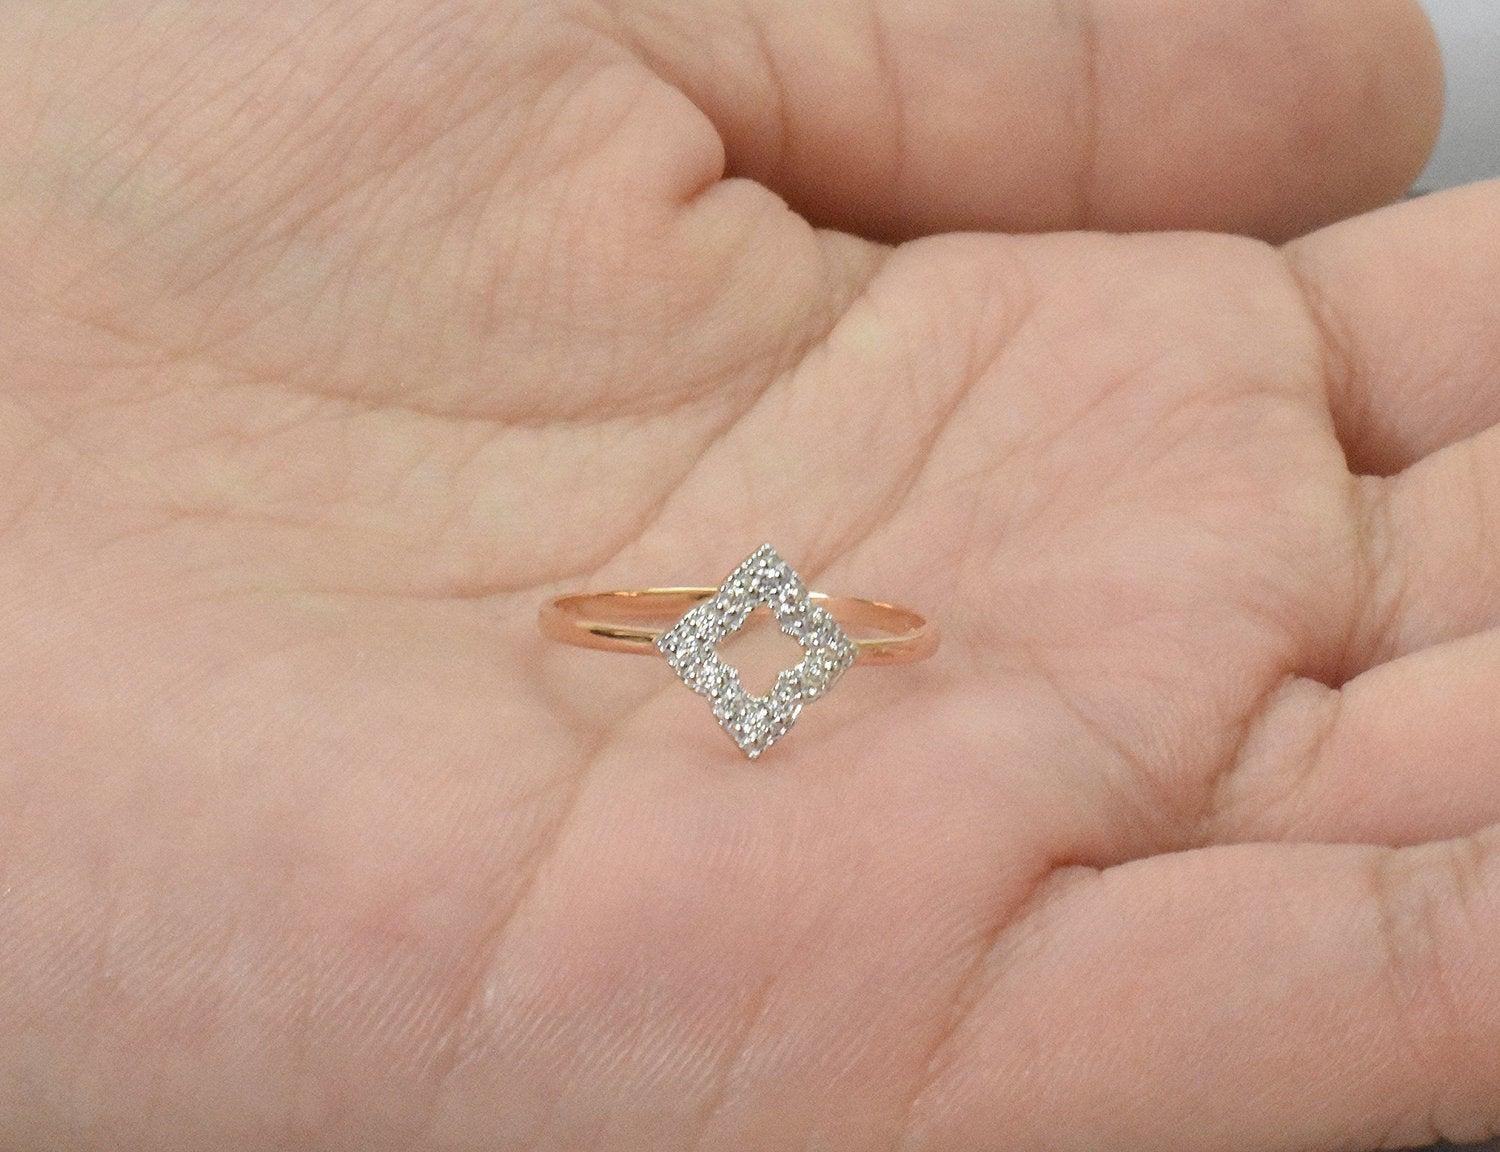 For Sale:  18k Gold Diamond Clover Ring Engagement Ring Stackable Diamond Ring 8